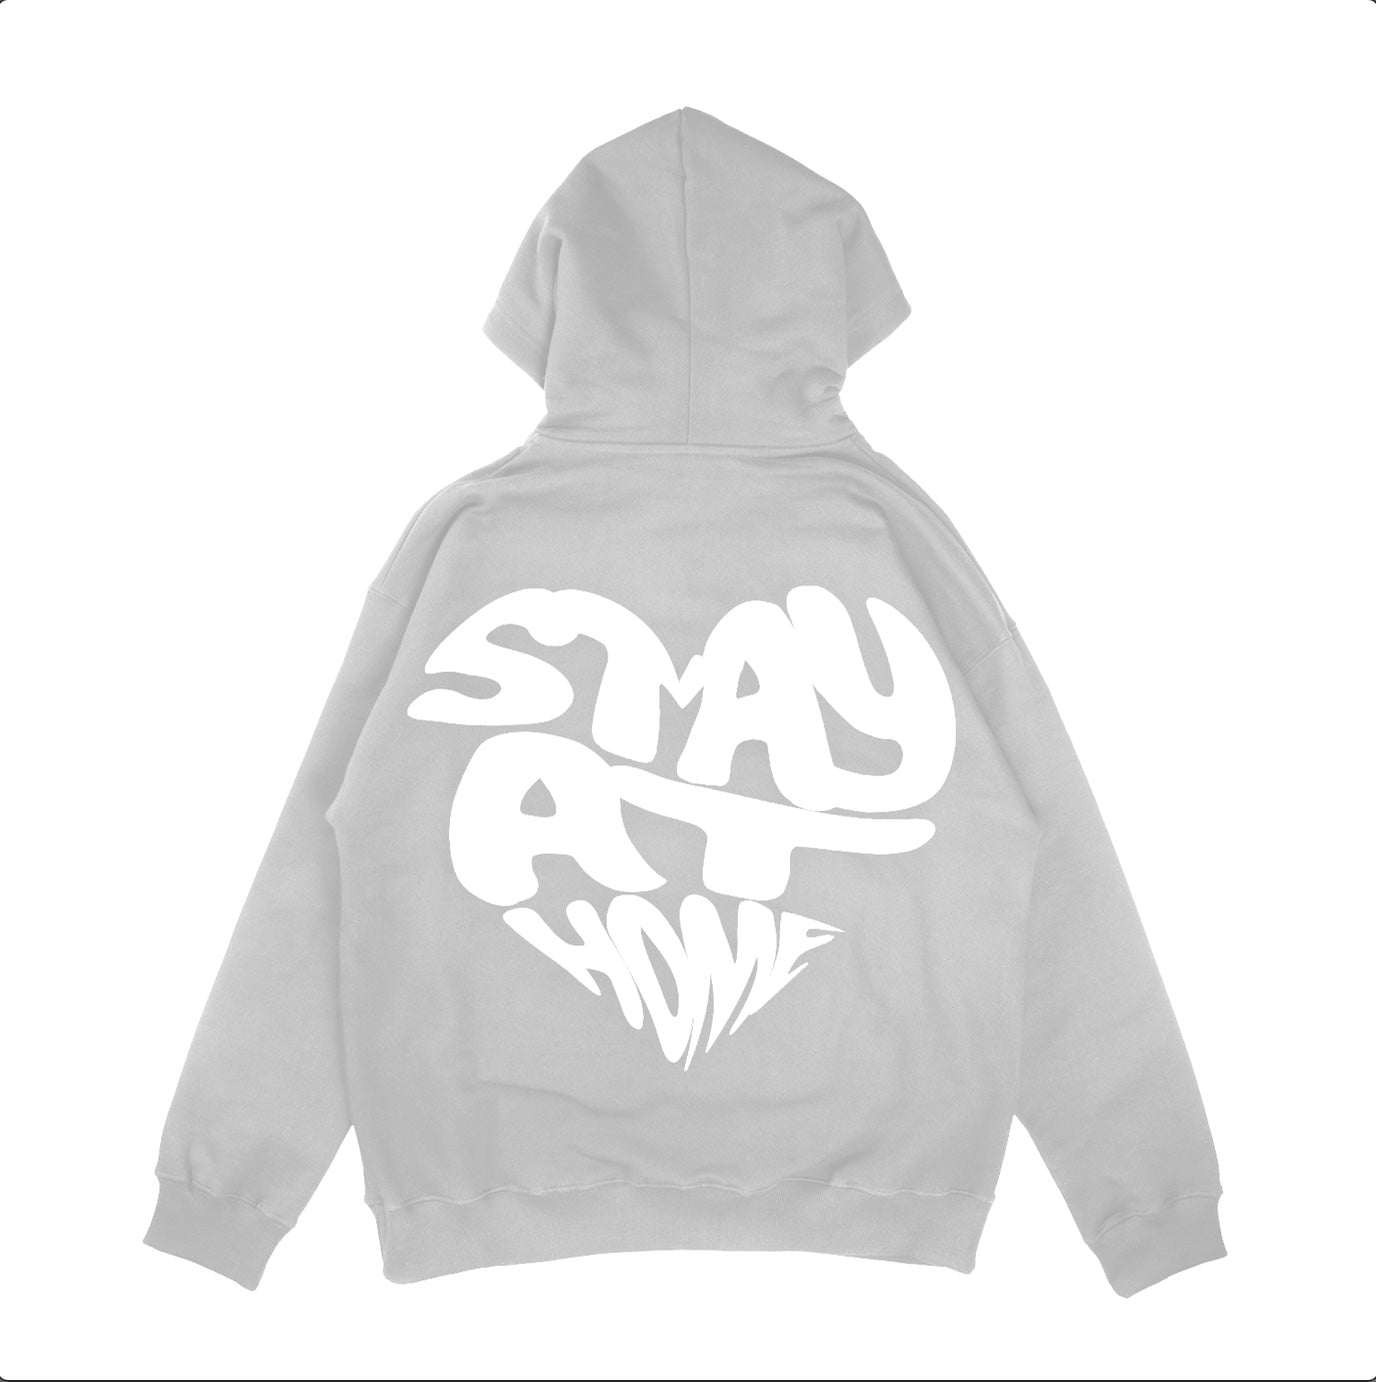 Stay at home Hoodie ( OVERSIZED)